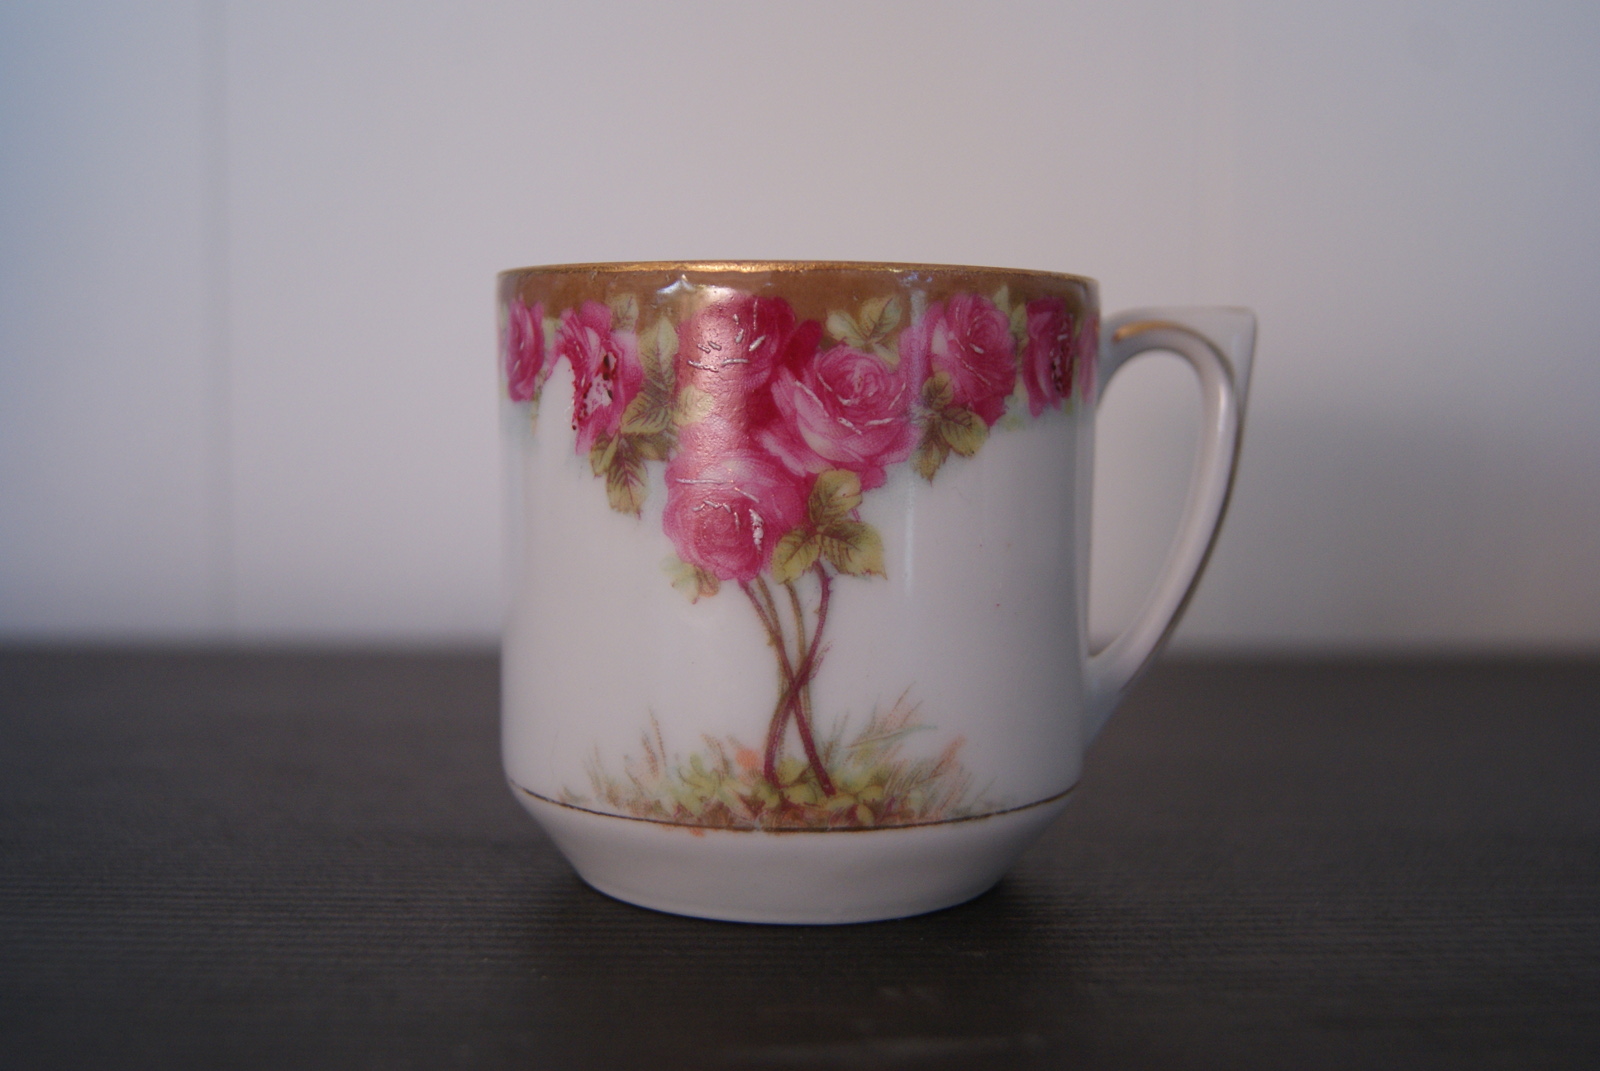 Waldenburg – Altwasser coffee cup and saucer with beautiful Art Nouveau roses